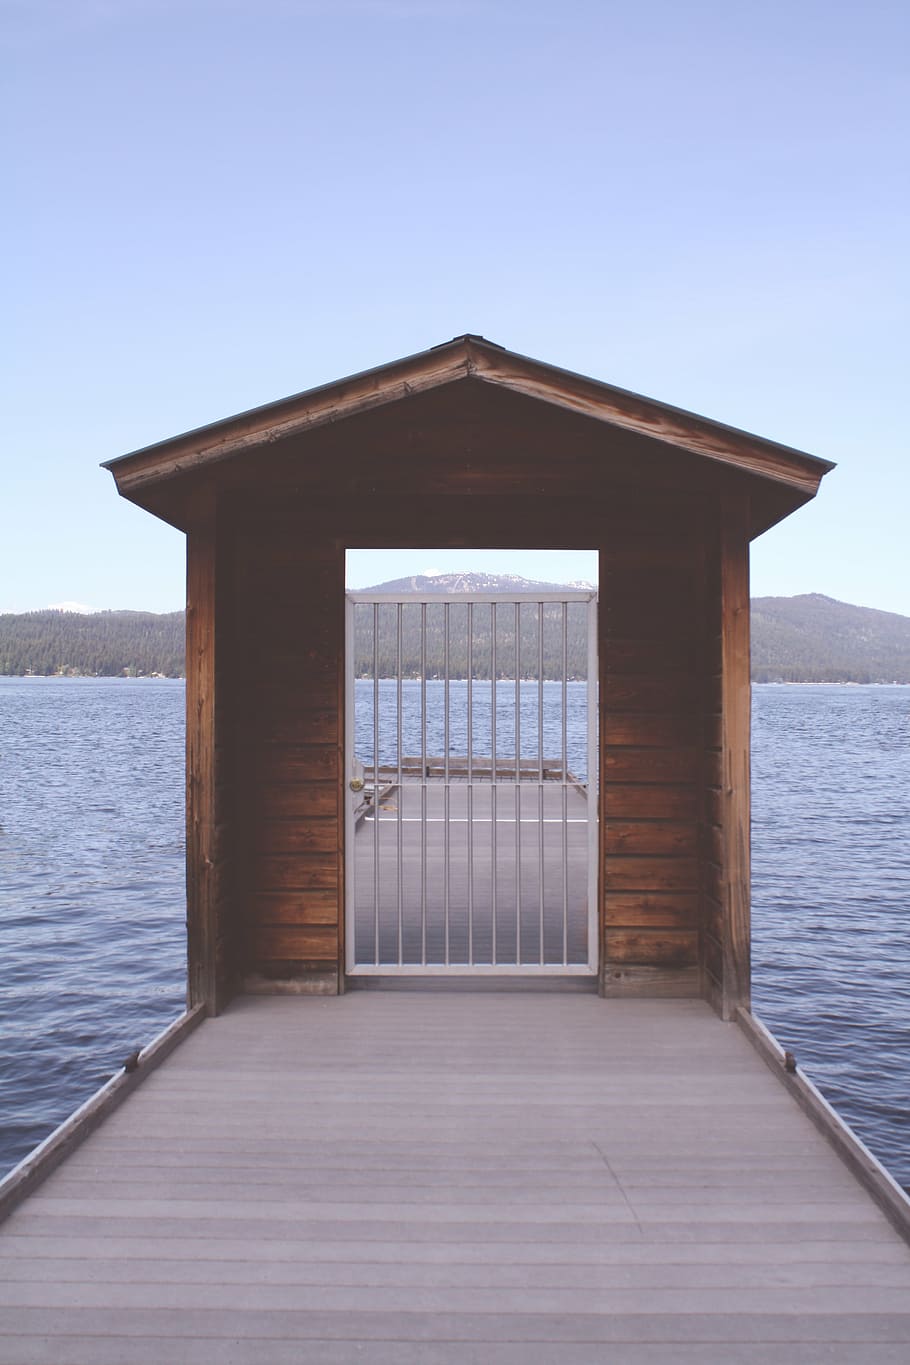 brown, wooden, dock, surrounded, water, white, steel, gate, gray, daytime